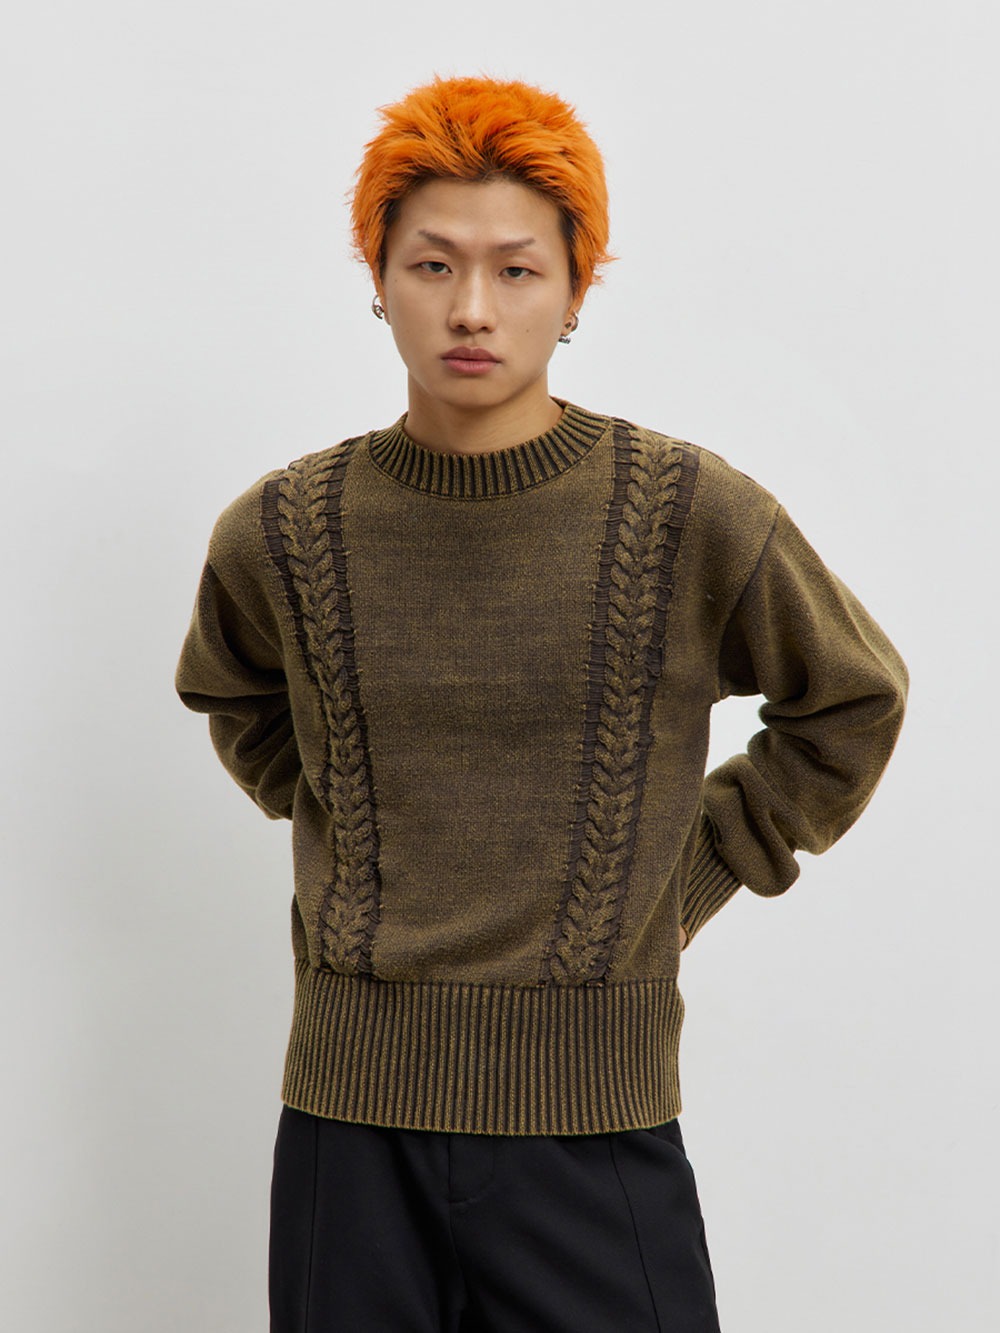 [CONP] Antique Hollow- out Sweater